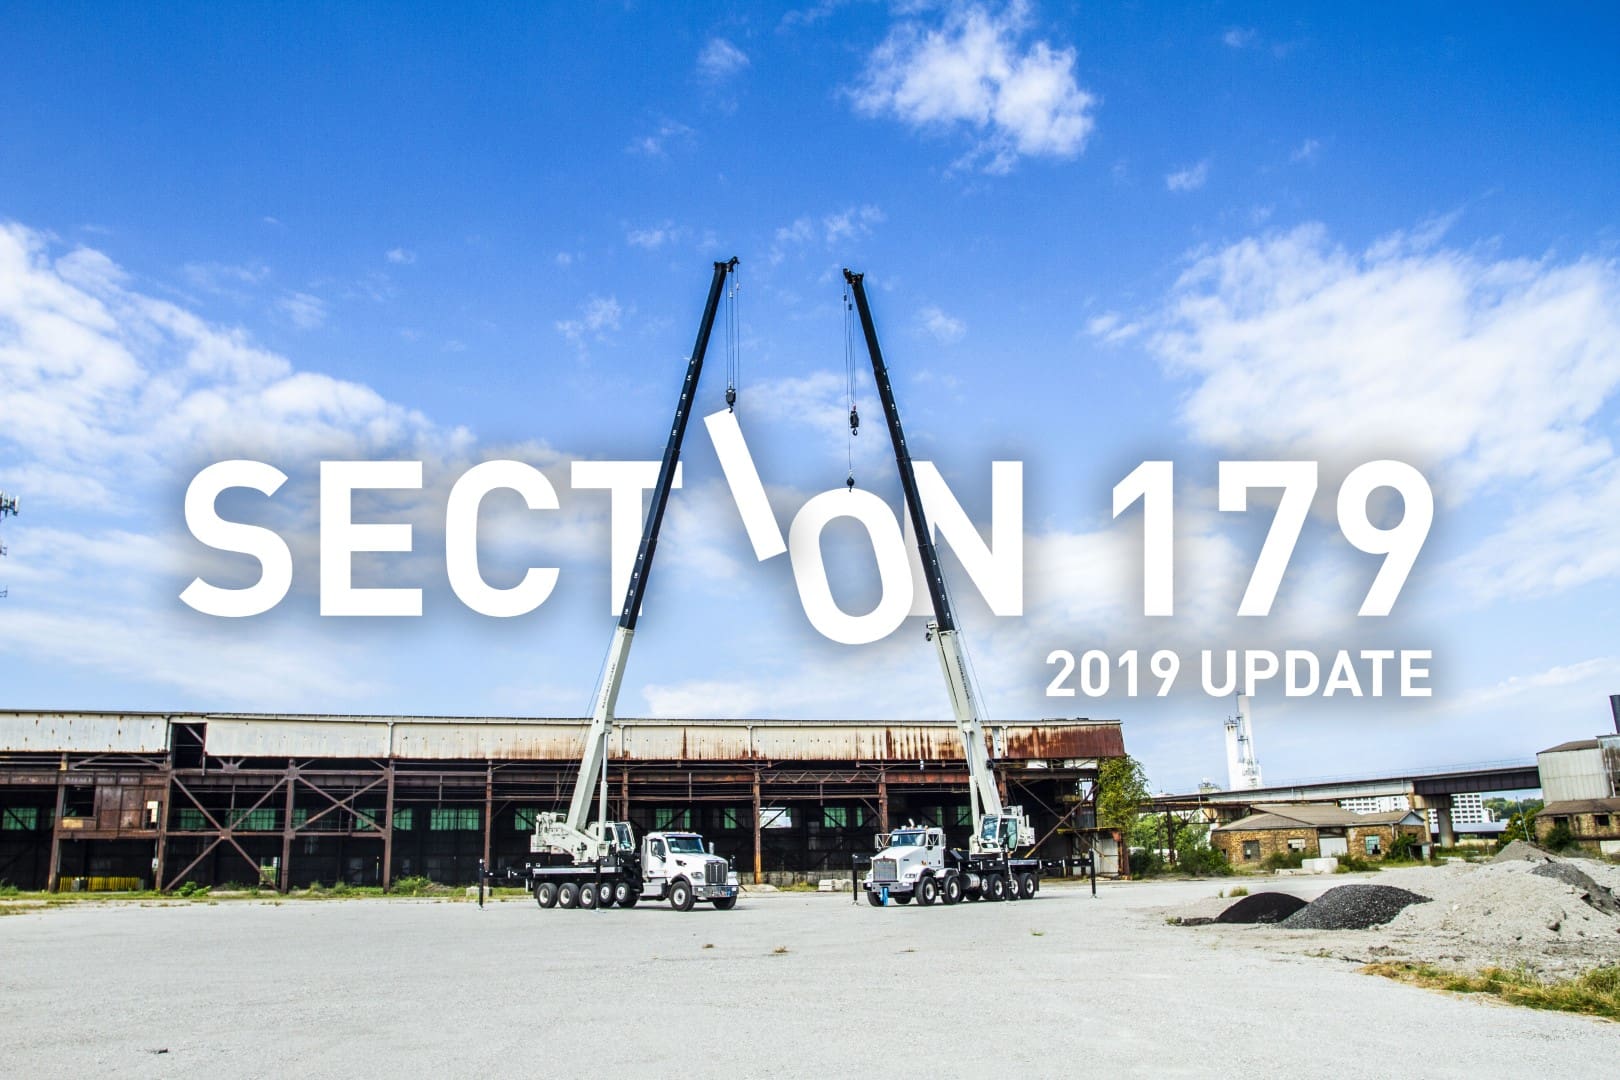 Section 179 2019 Update